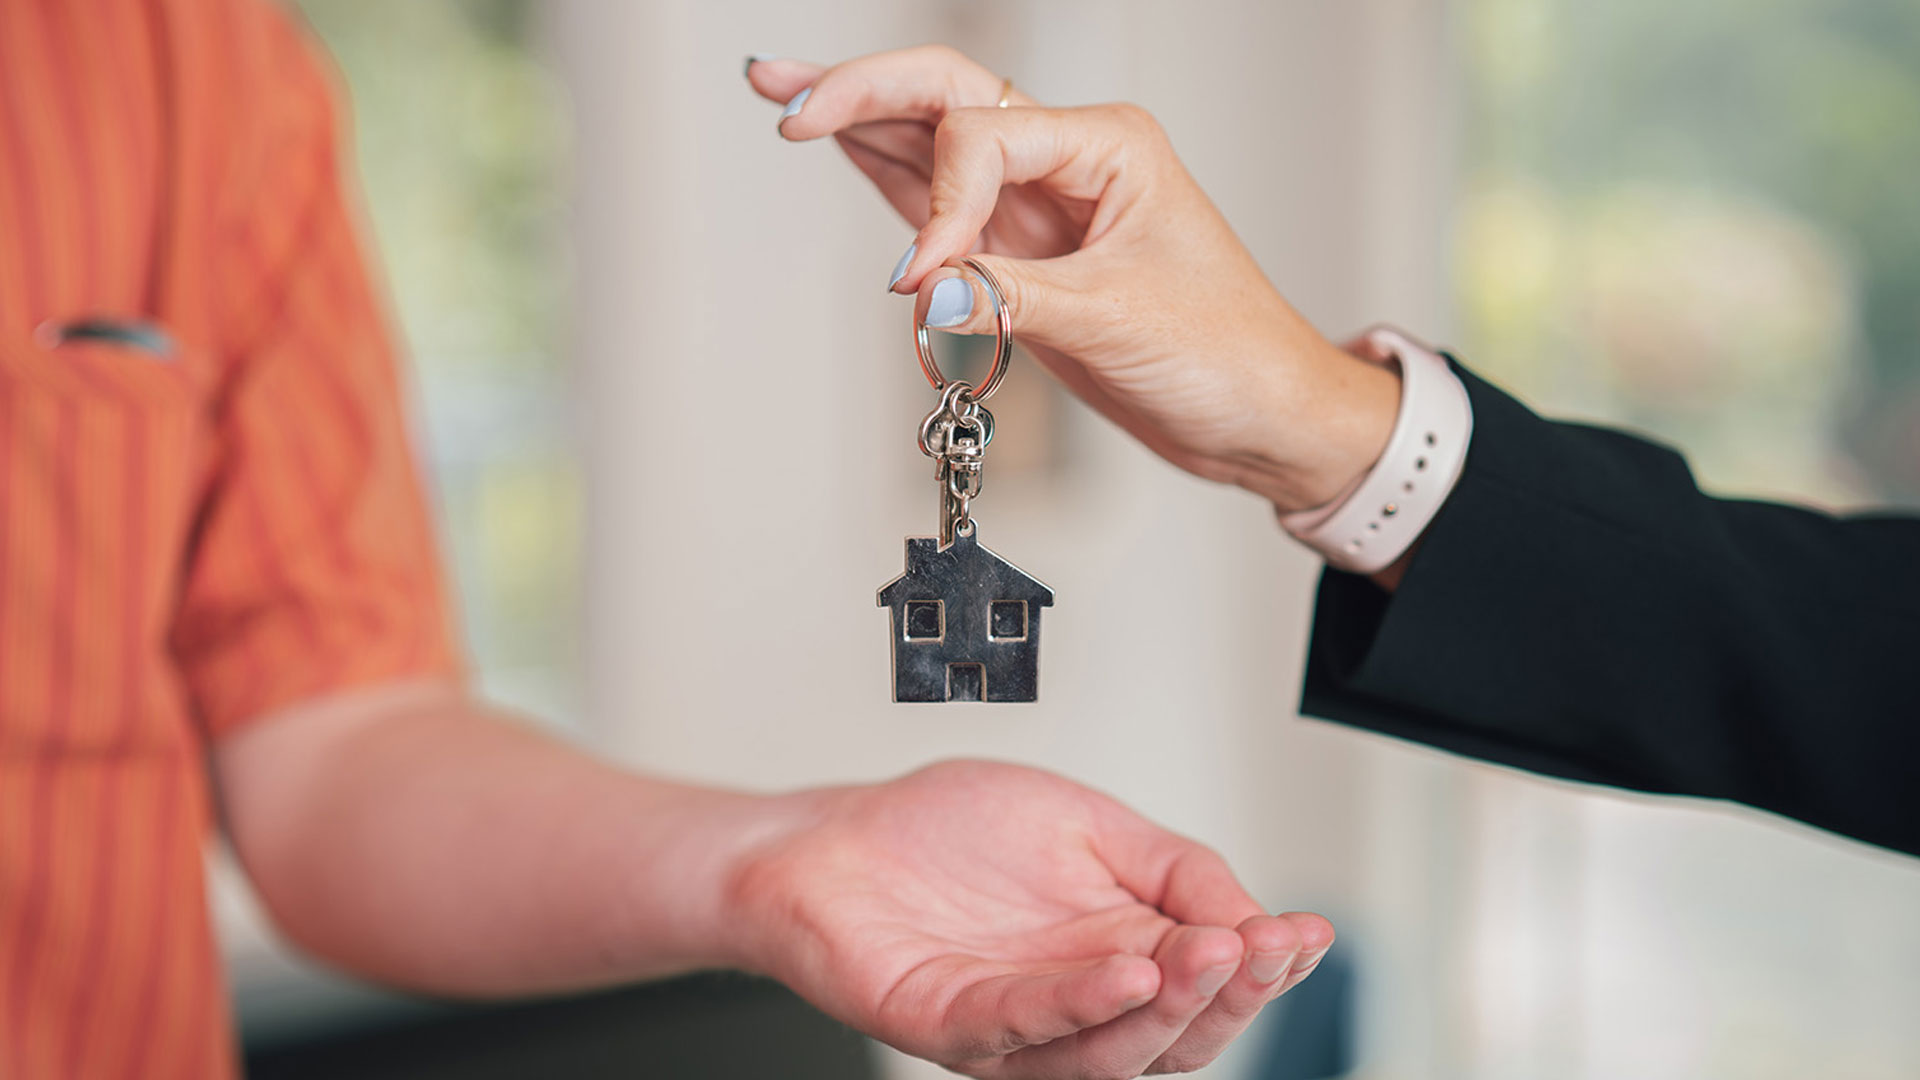 Real estate agent holding up a key ring with a home icon on it and passing it to the new homeowner.